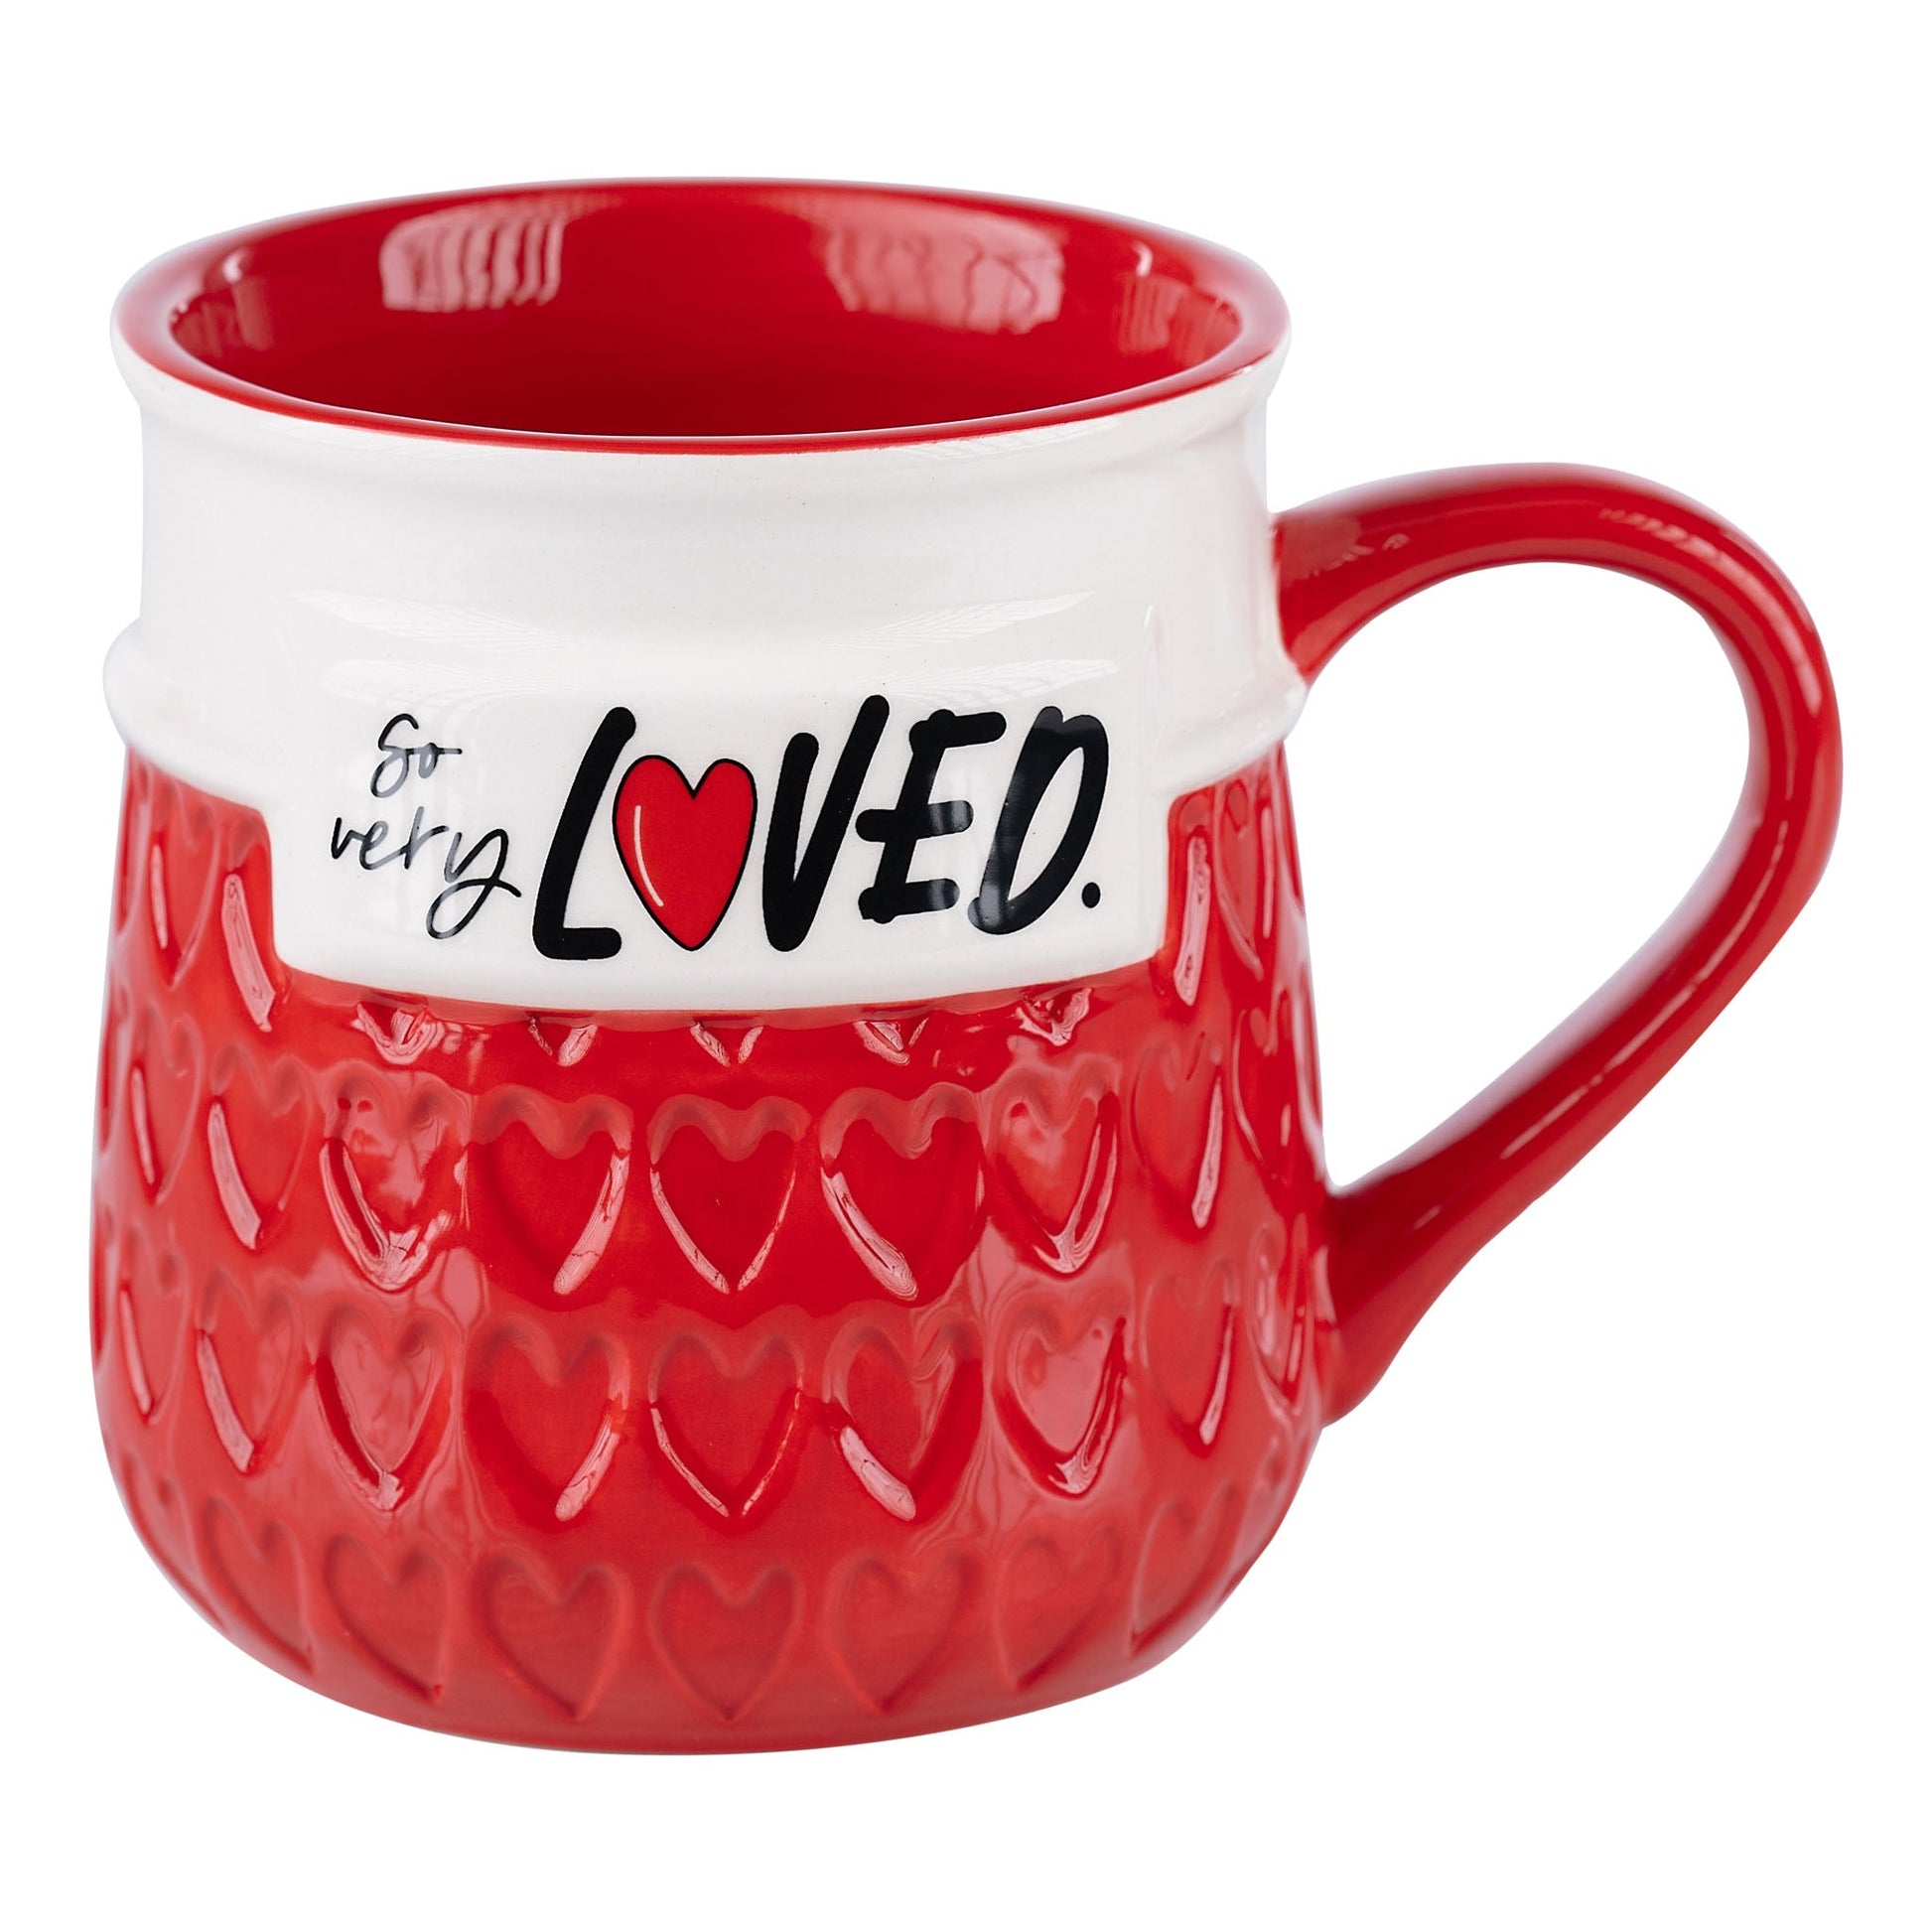 red and white mug with hearts stamped into the red with text "so very loved" displayed against a white background